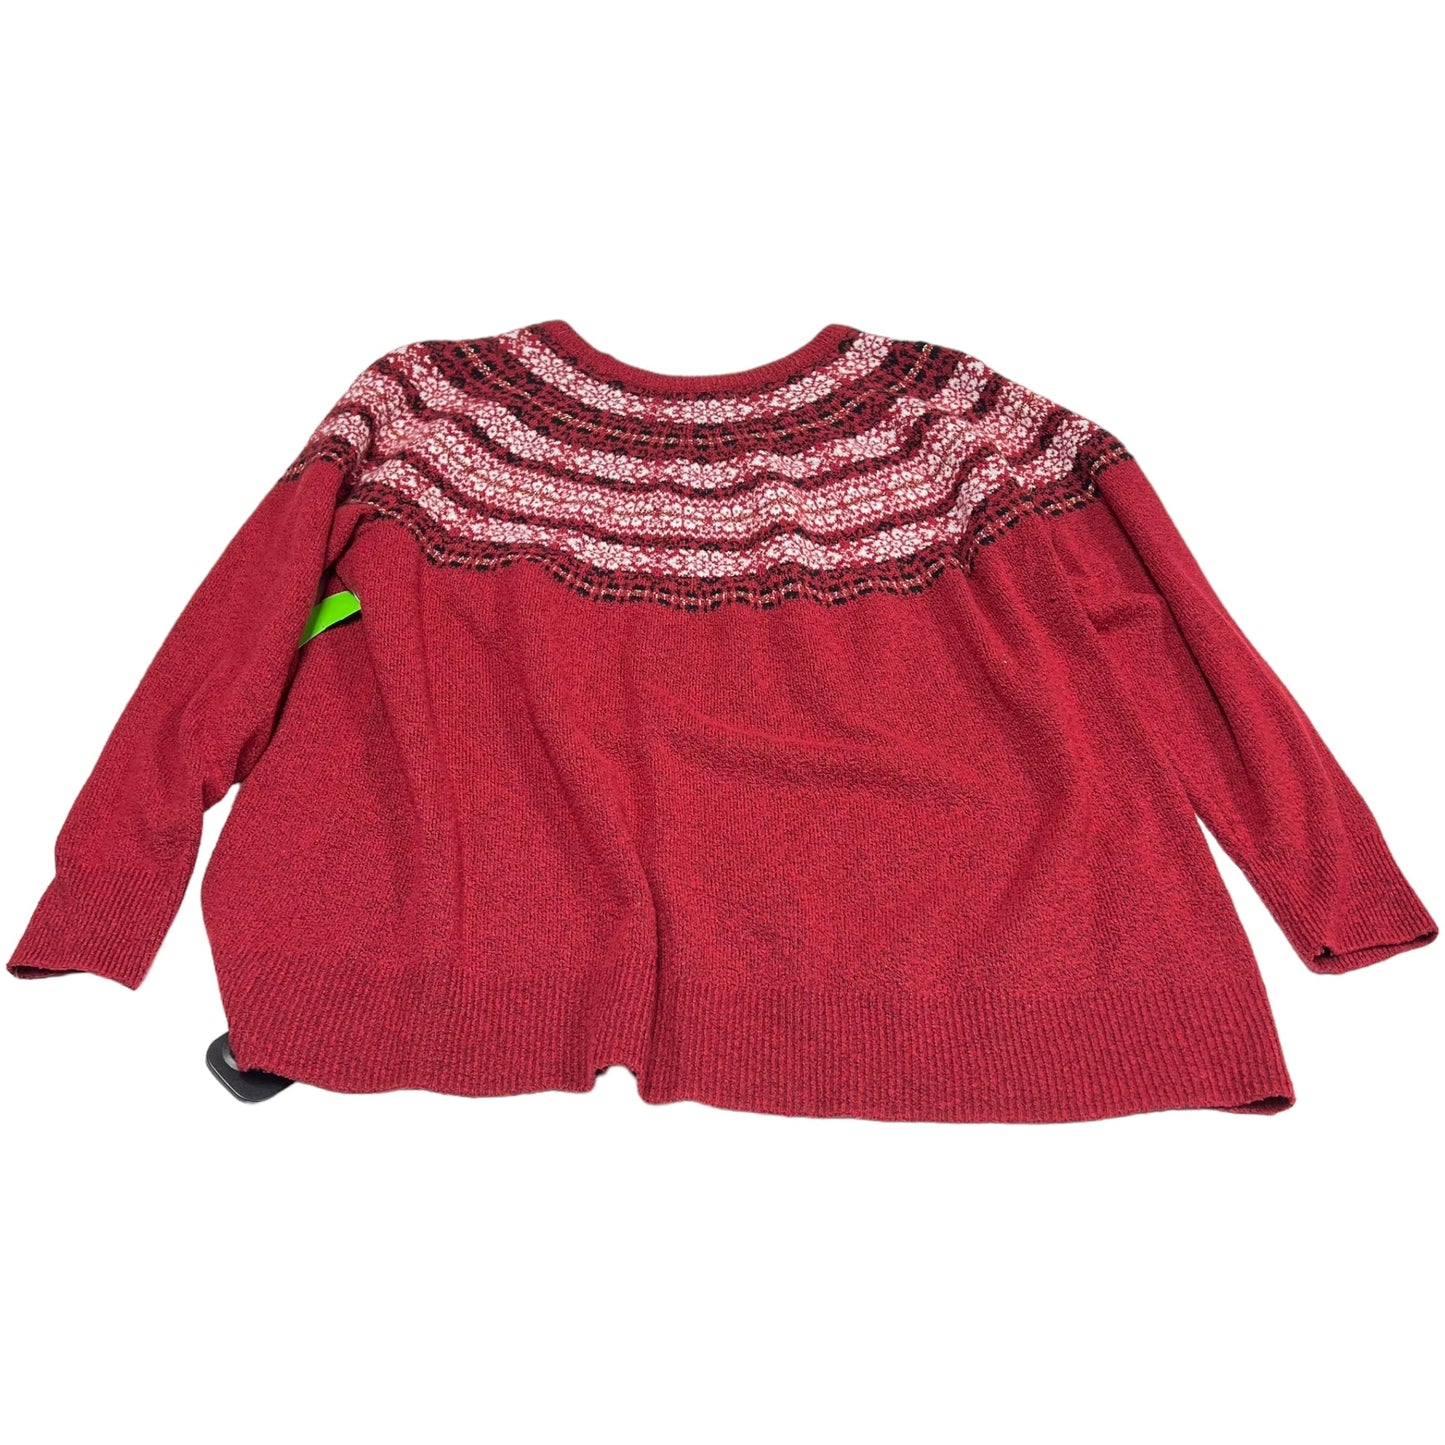 Sweater By Croft And Barrow  Size: 2x